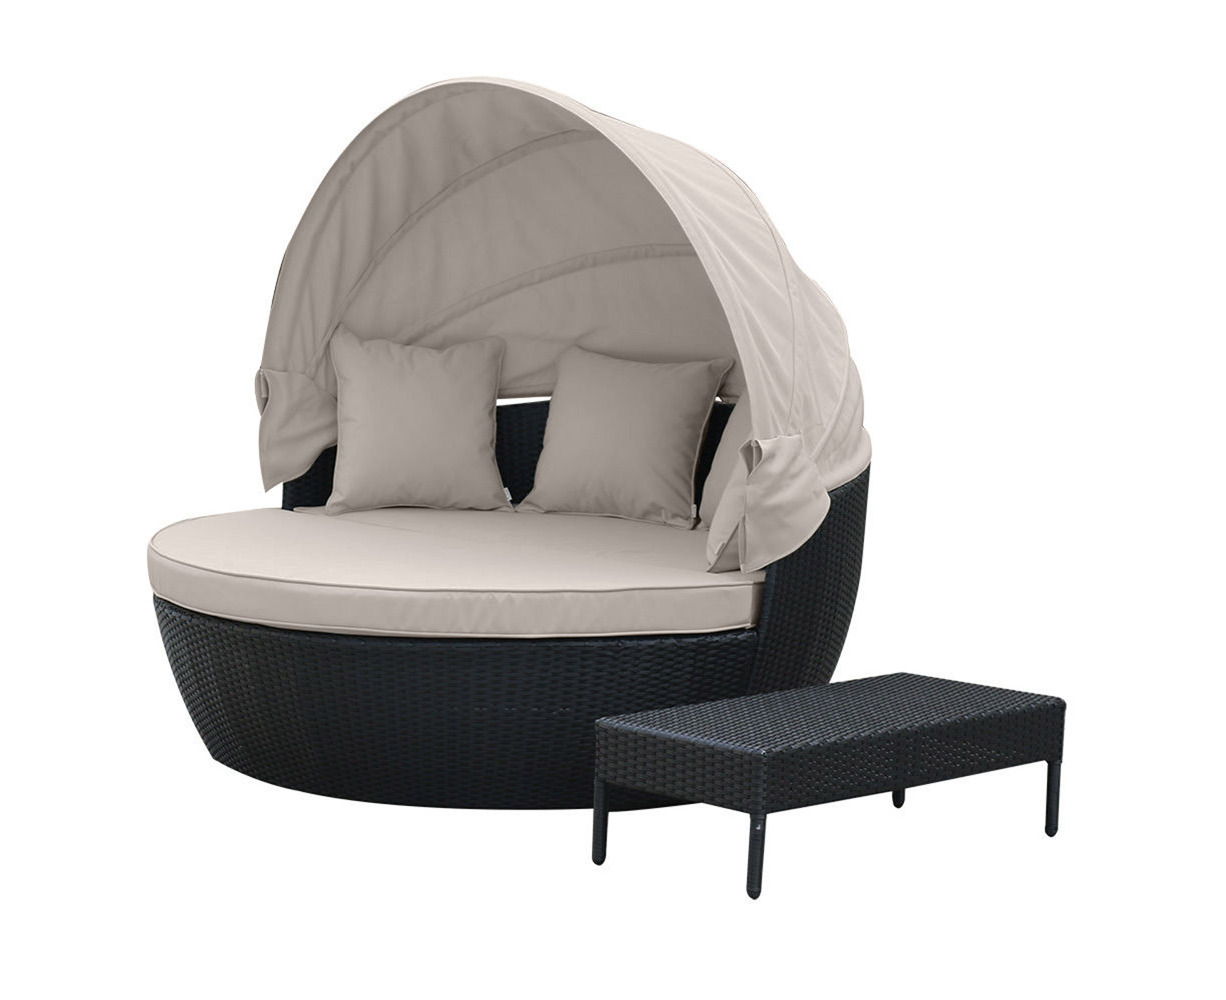 Erith Wicker Outdoor Furniture Day Bed w/ Canopy - Black | Catch.com.au